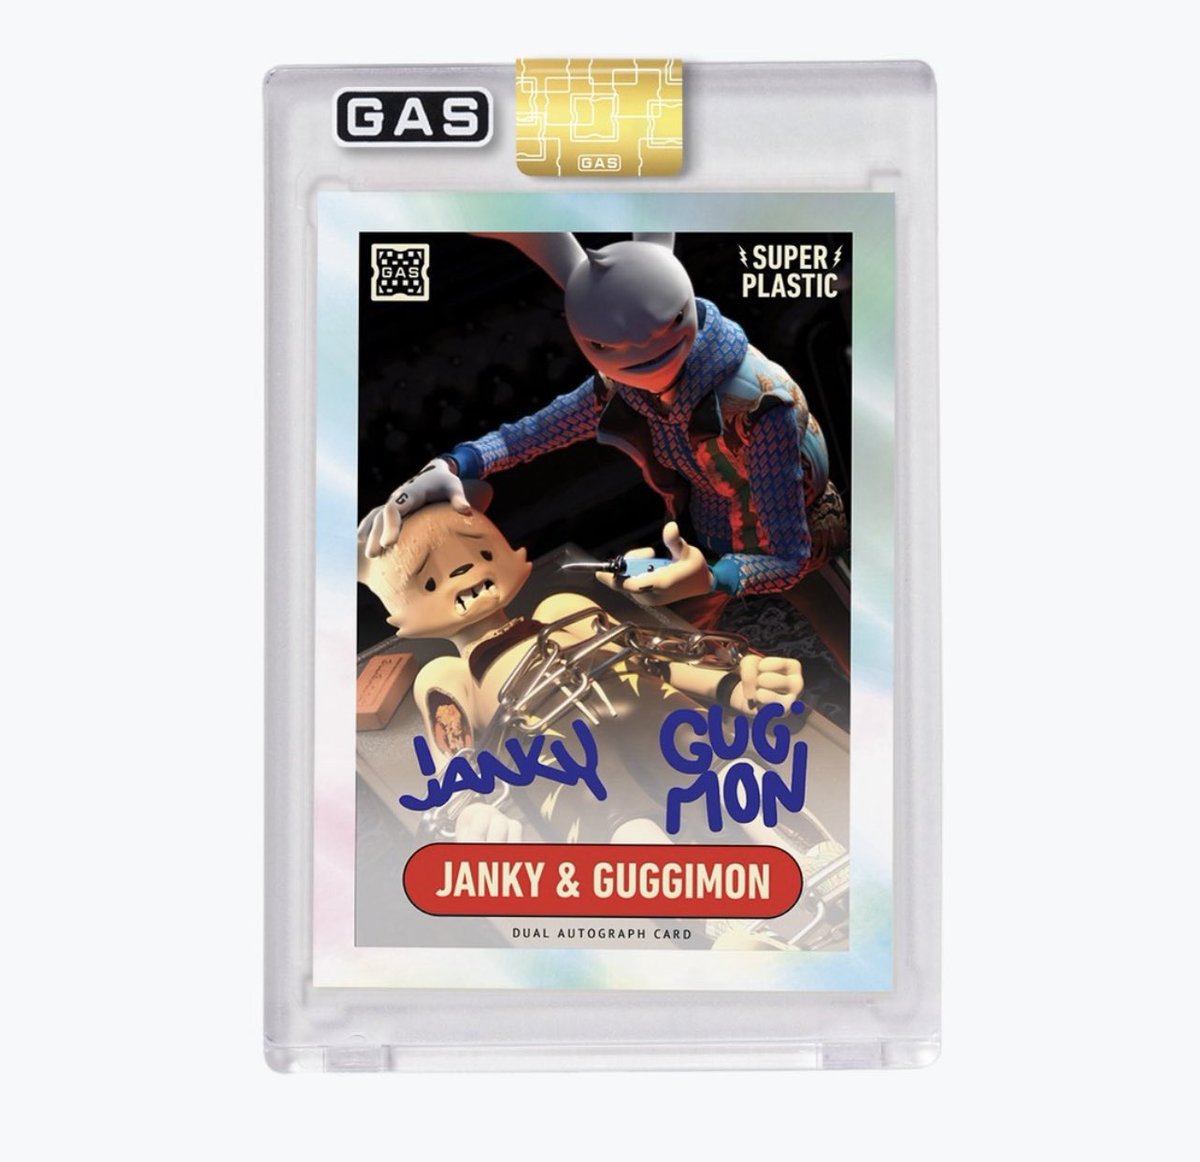 GAS is proud to present the first-ever official @superplastic @janky & @guggimon Trading Card. Each Ltd. Ed. Dual Autograph Foil Prism is hand-signed on-card by the Janky & Guggimon characters!

Available for pre-order on Friday, 5/26 at 10am PT [1pm ET] on @NTWRKlive (cont.)